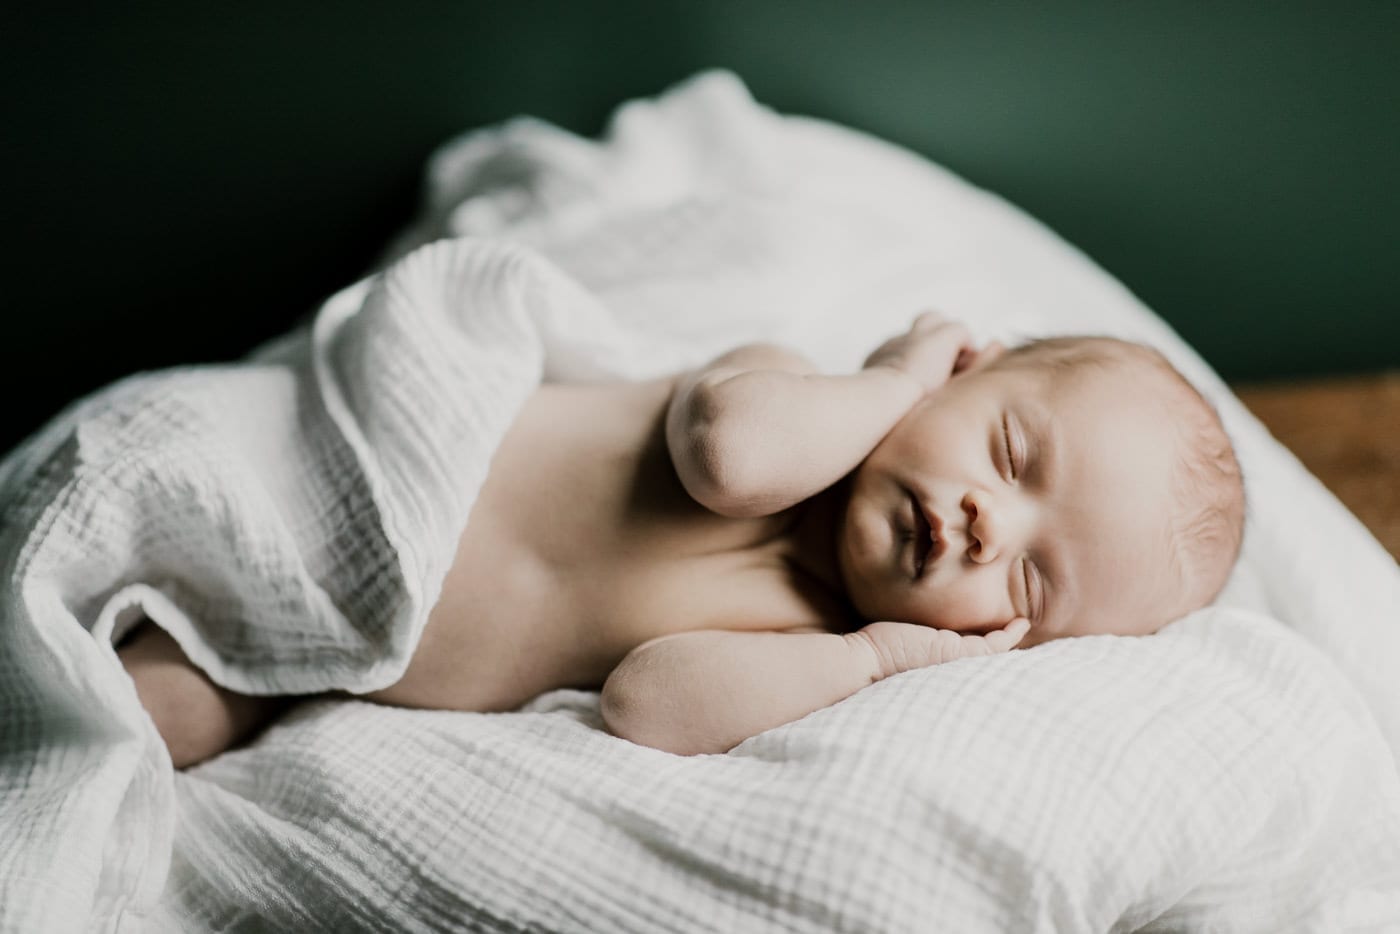 new born laying on white blanket sleeping - in-home newborn session